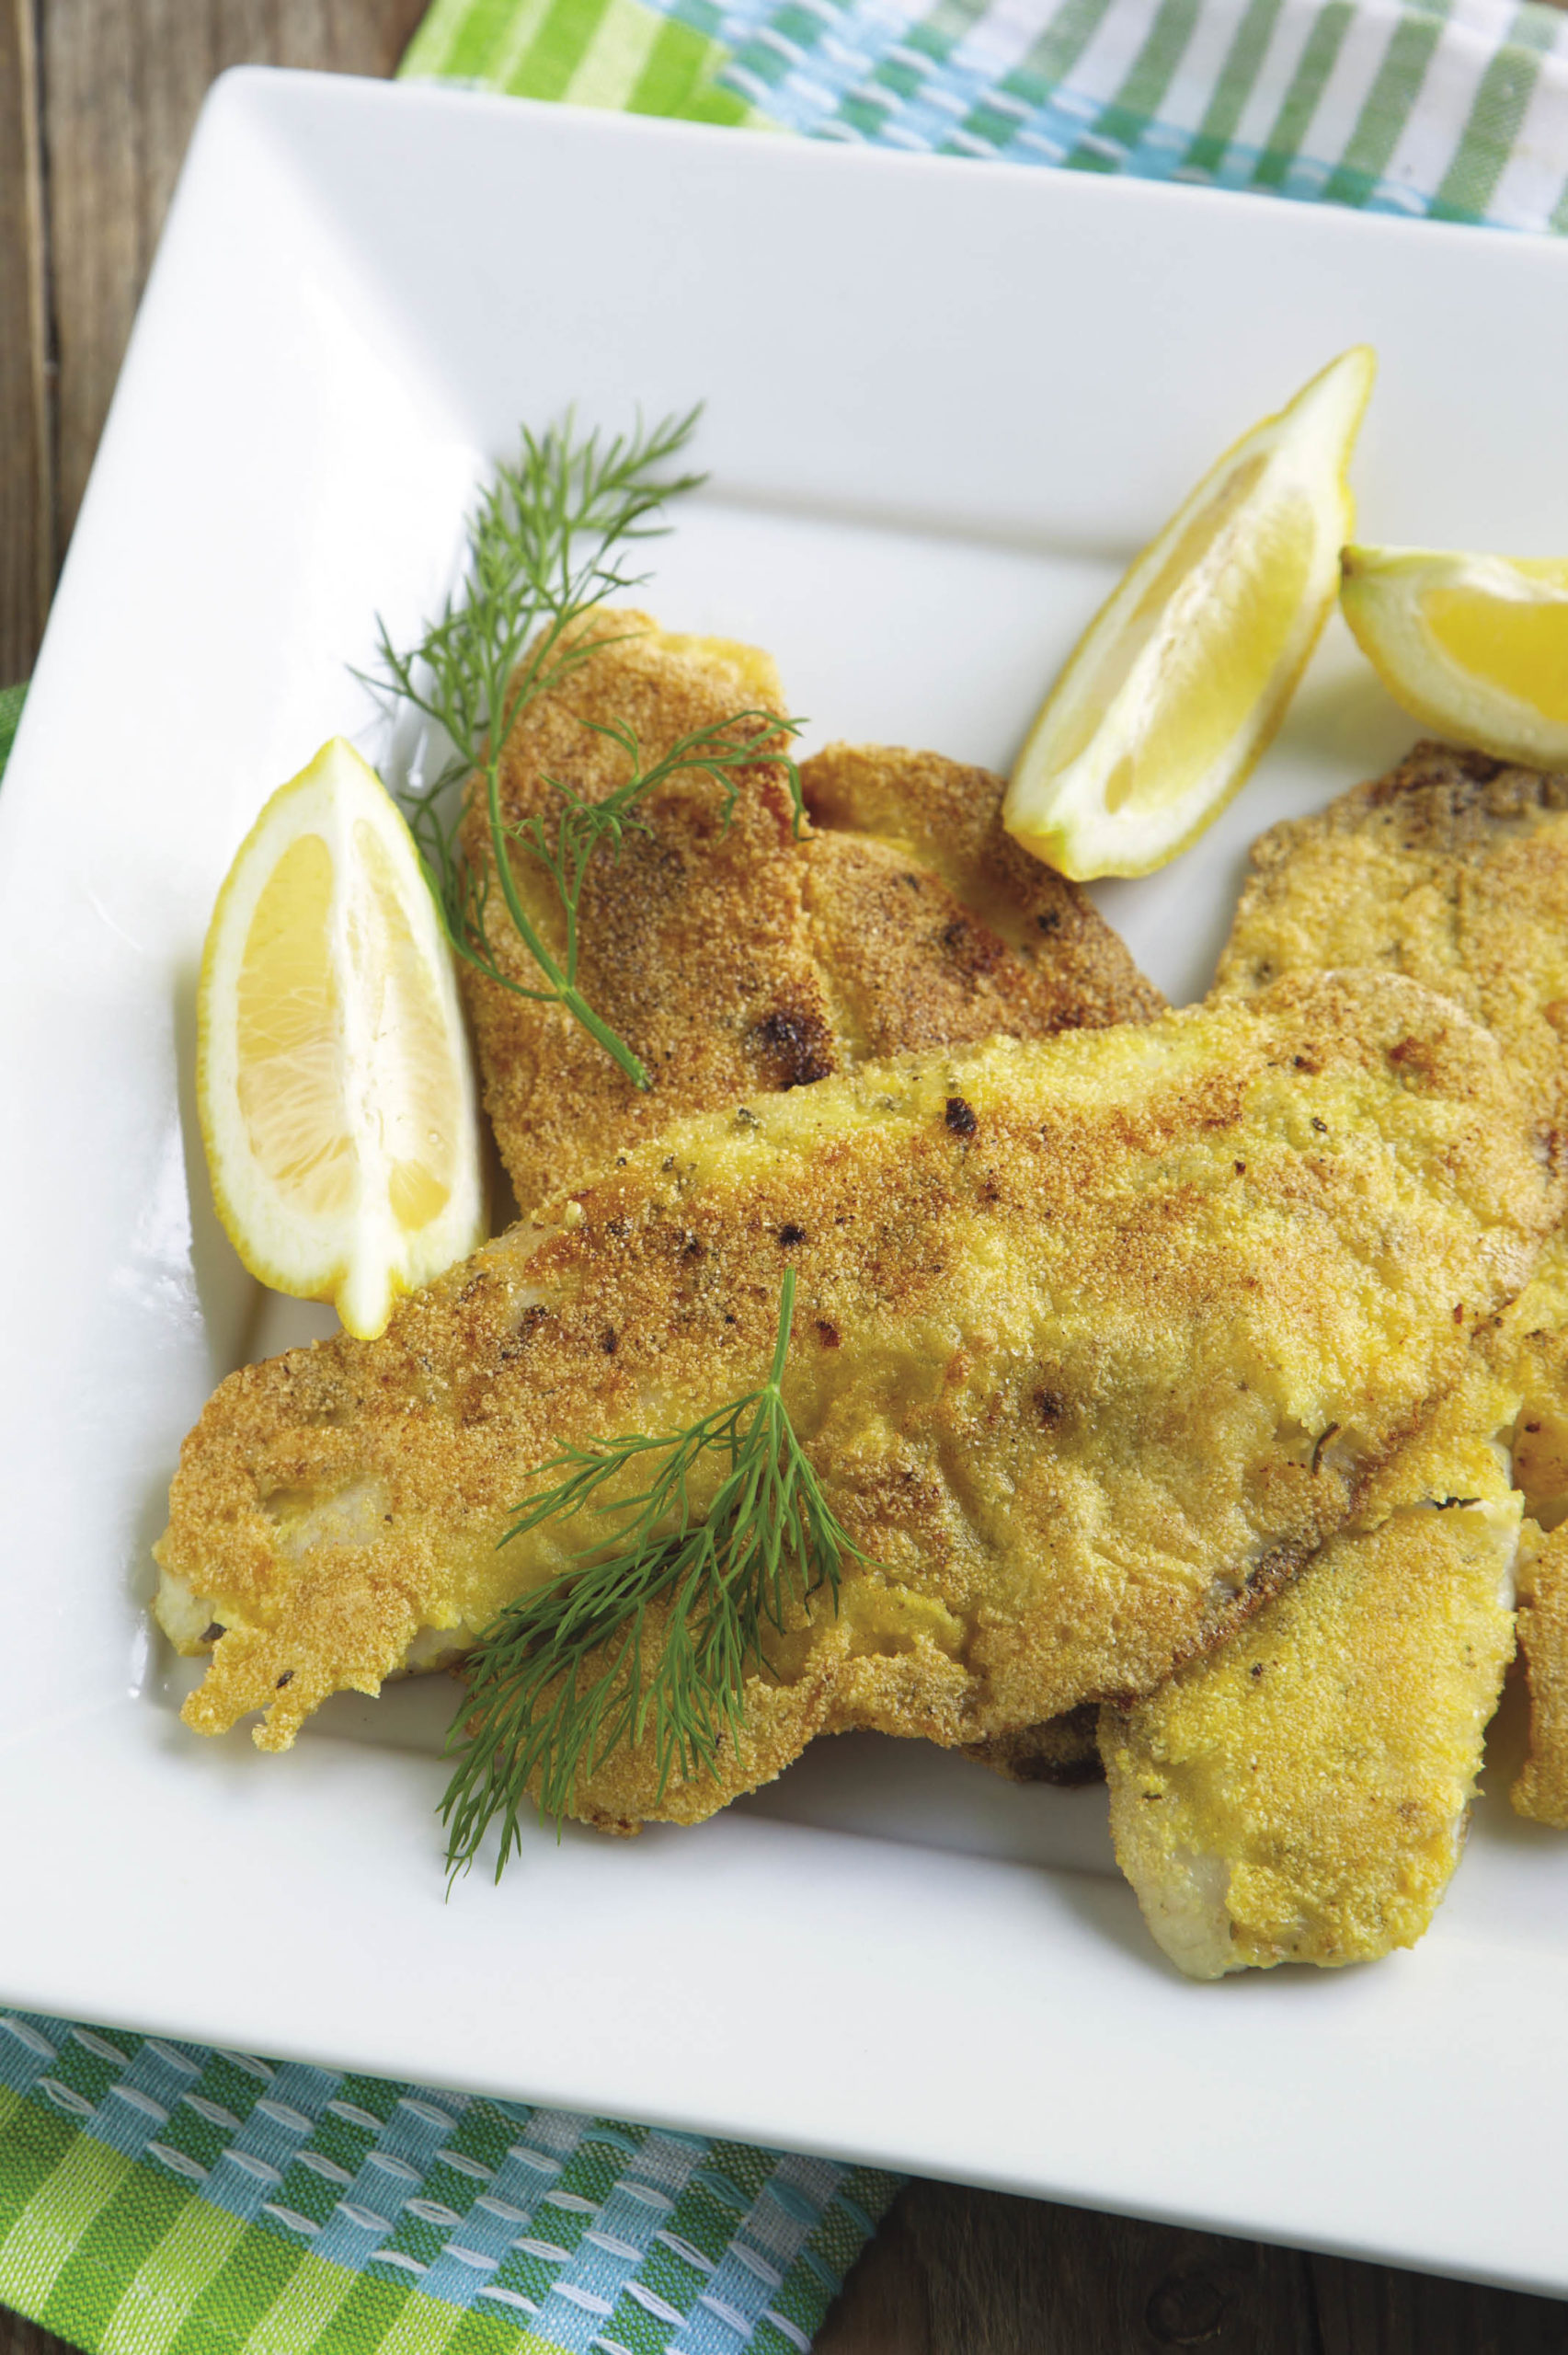 Cornmeal-Crusted Pollock with Rosemary Chips